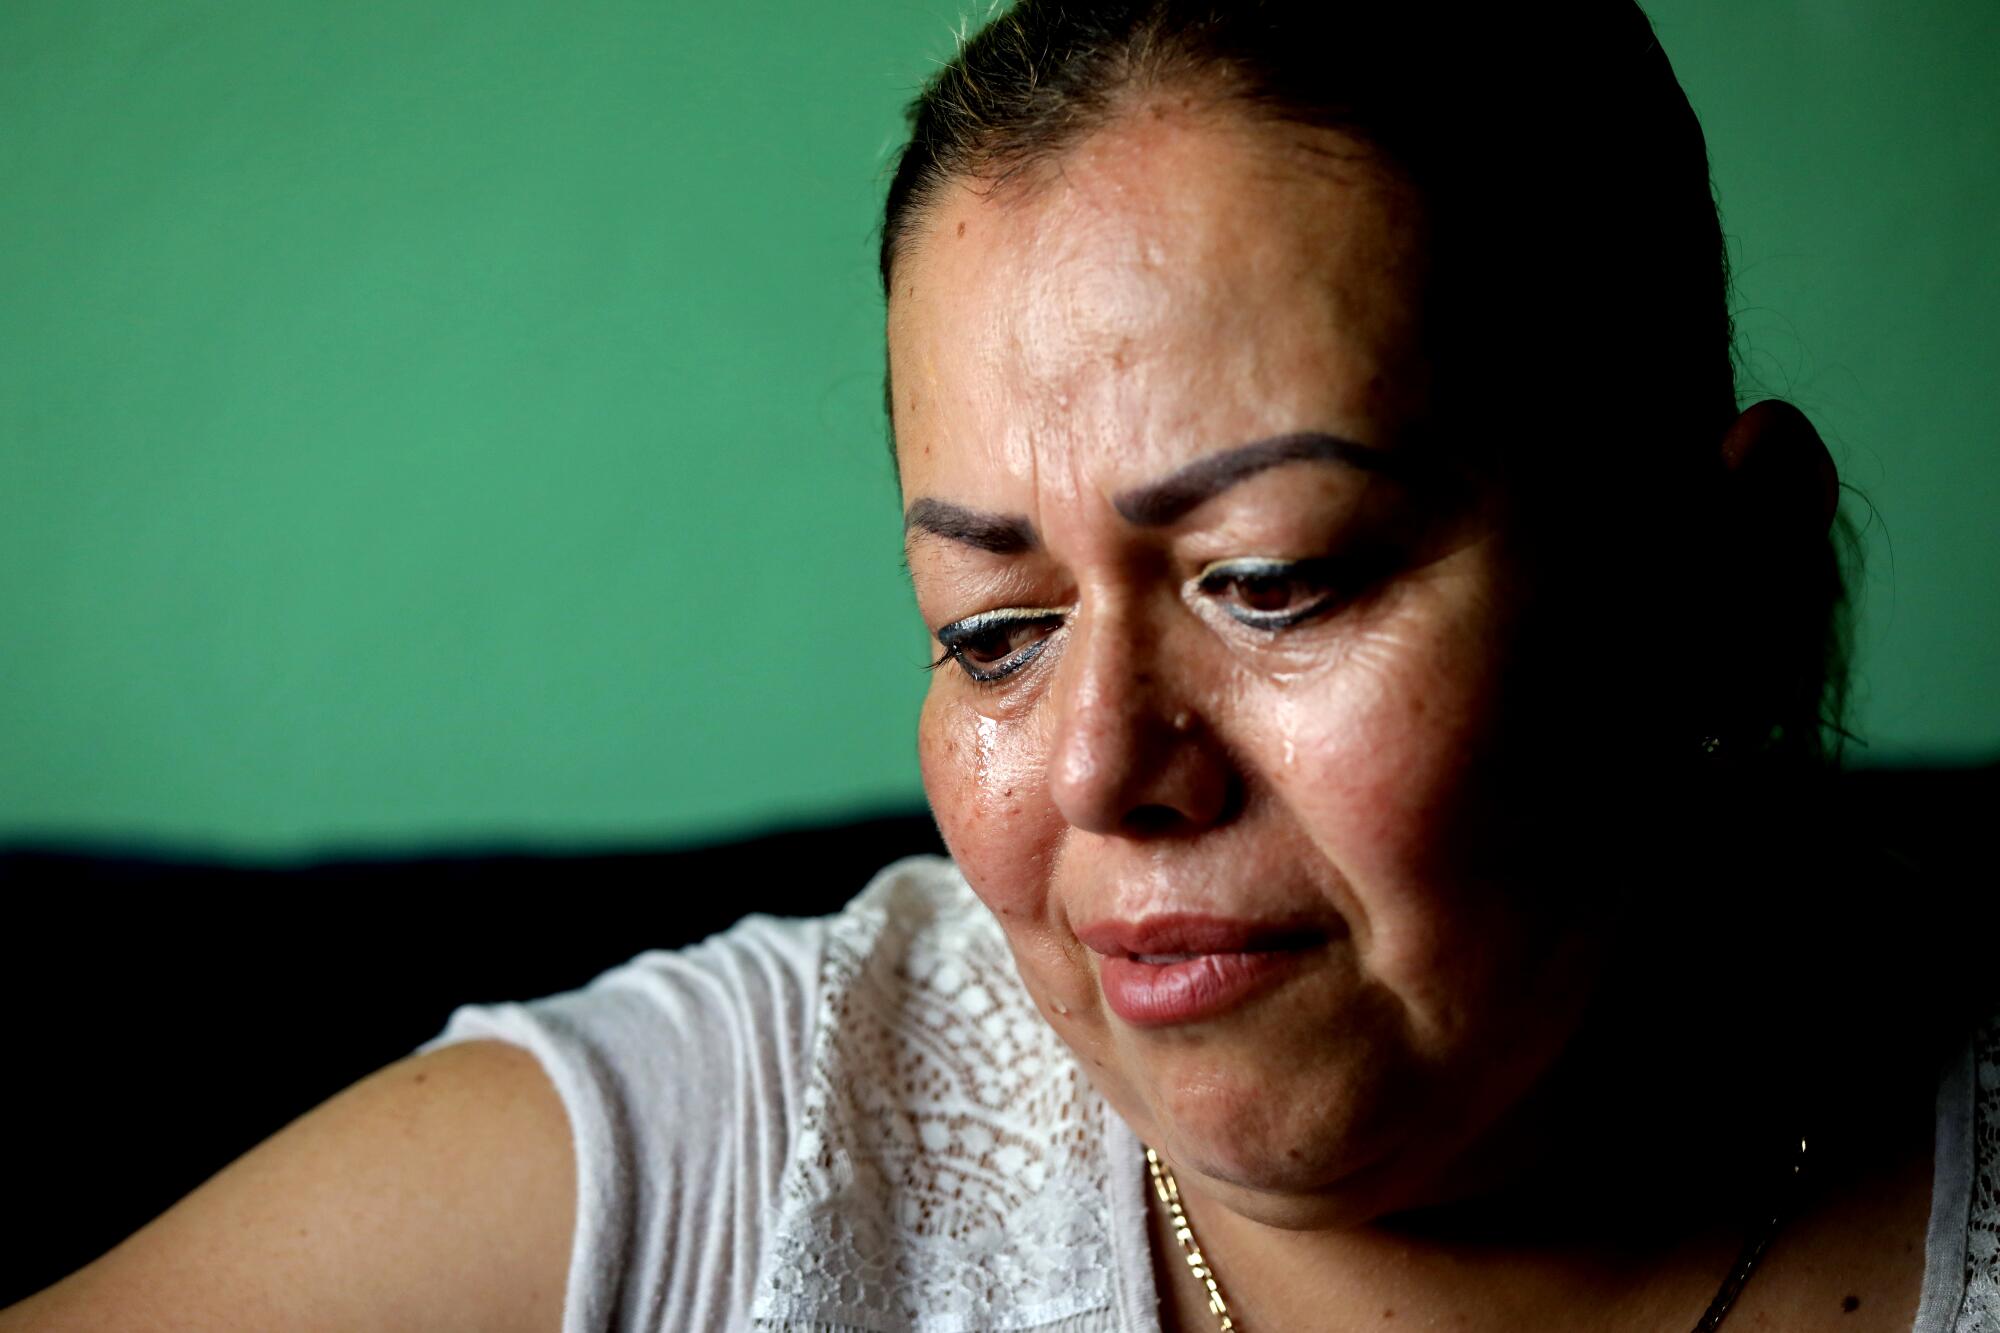 Josefina Rodriguez weeps while talking about her son and husband.